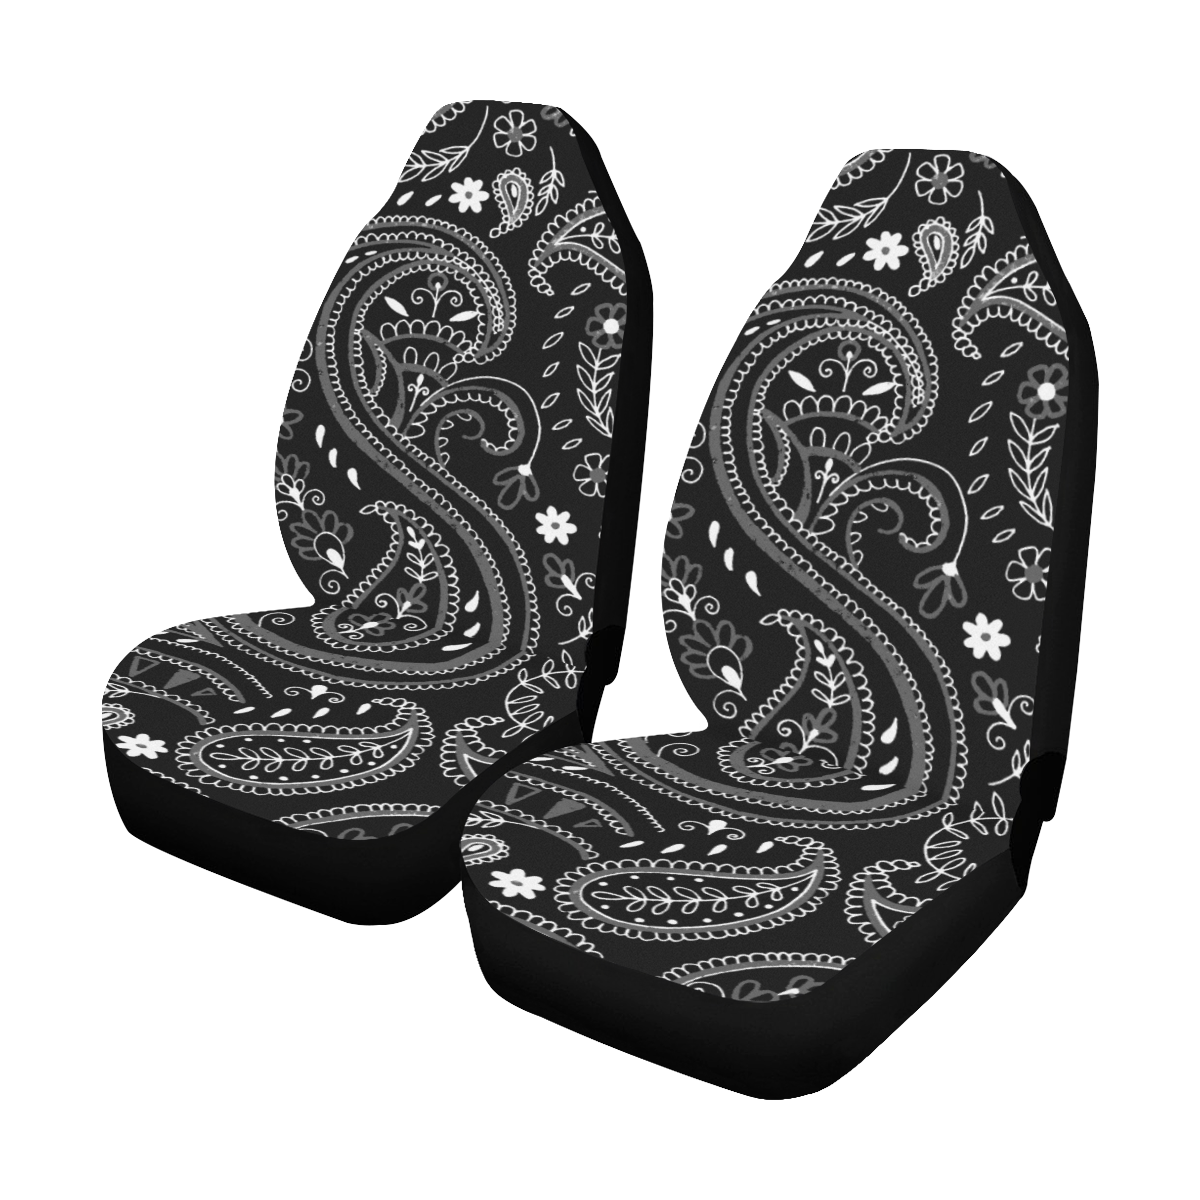 PAISLEY 7 Car Seat Covers (Set of 2)